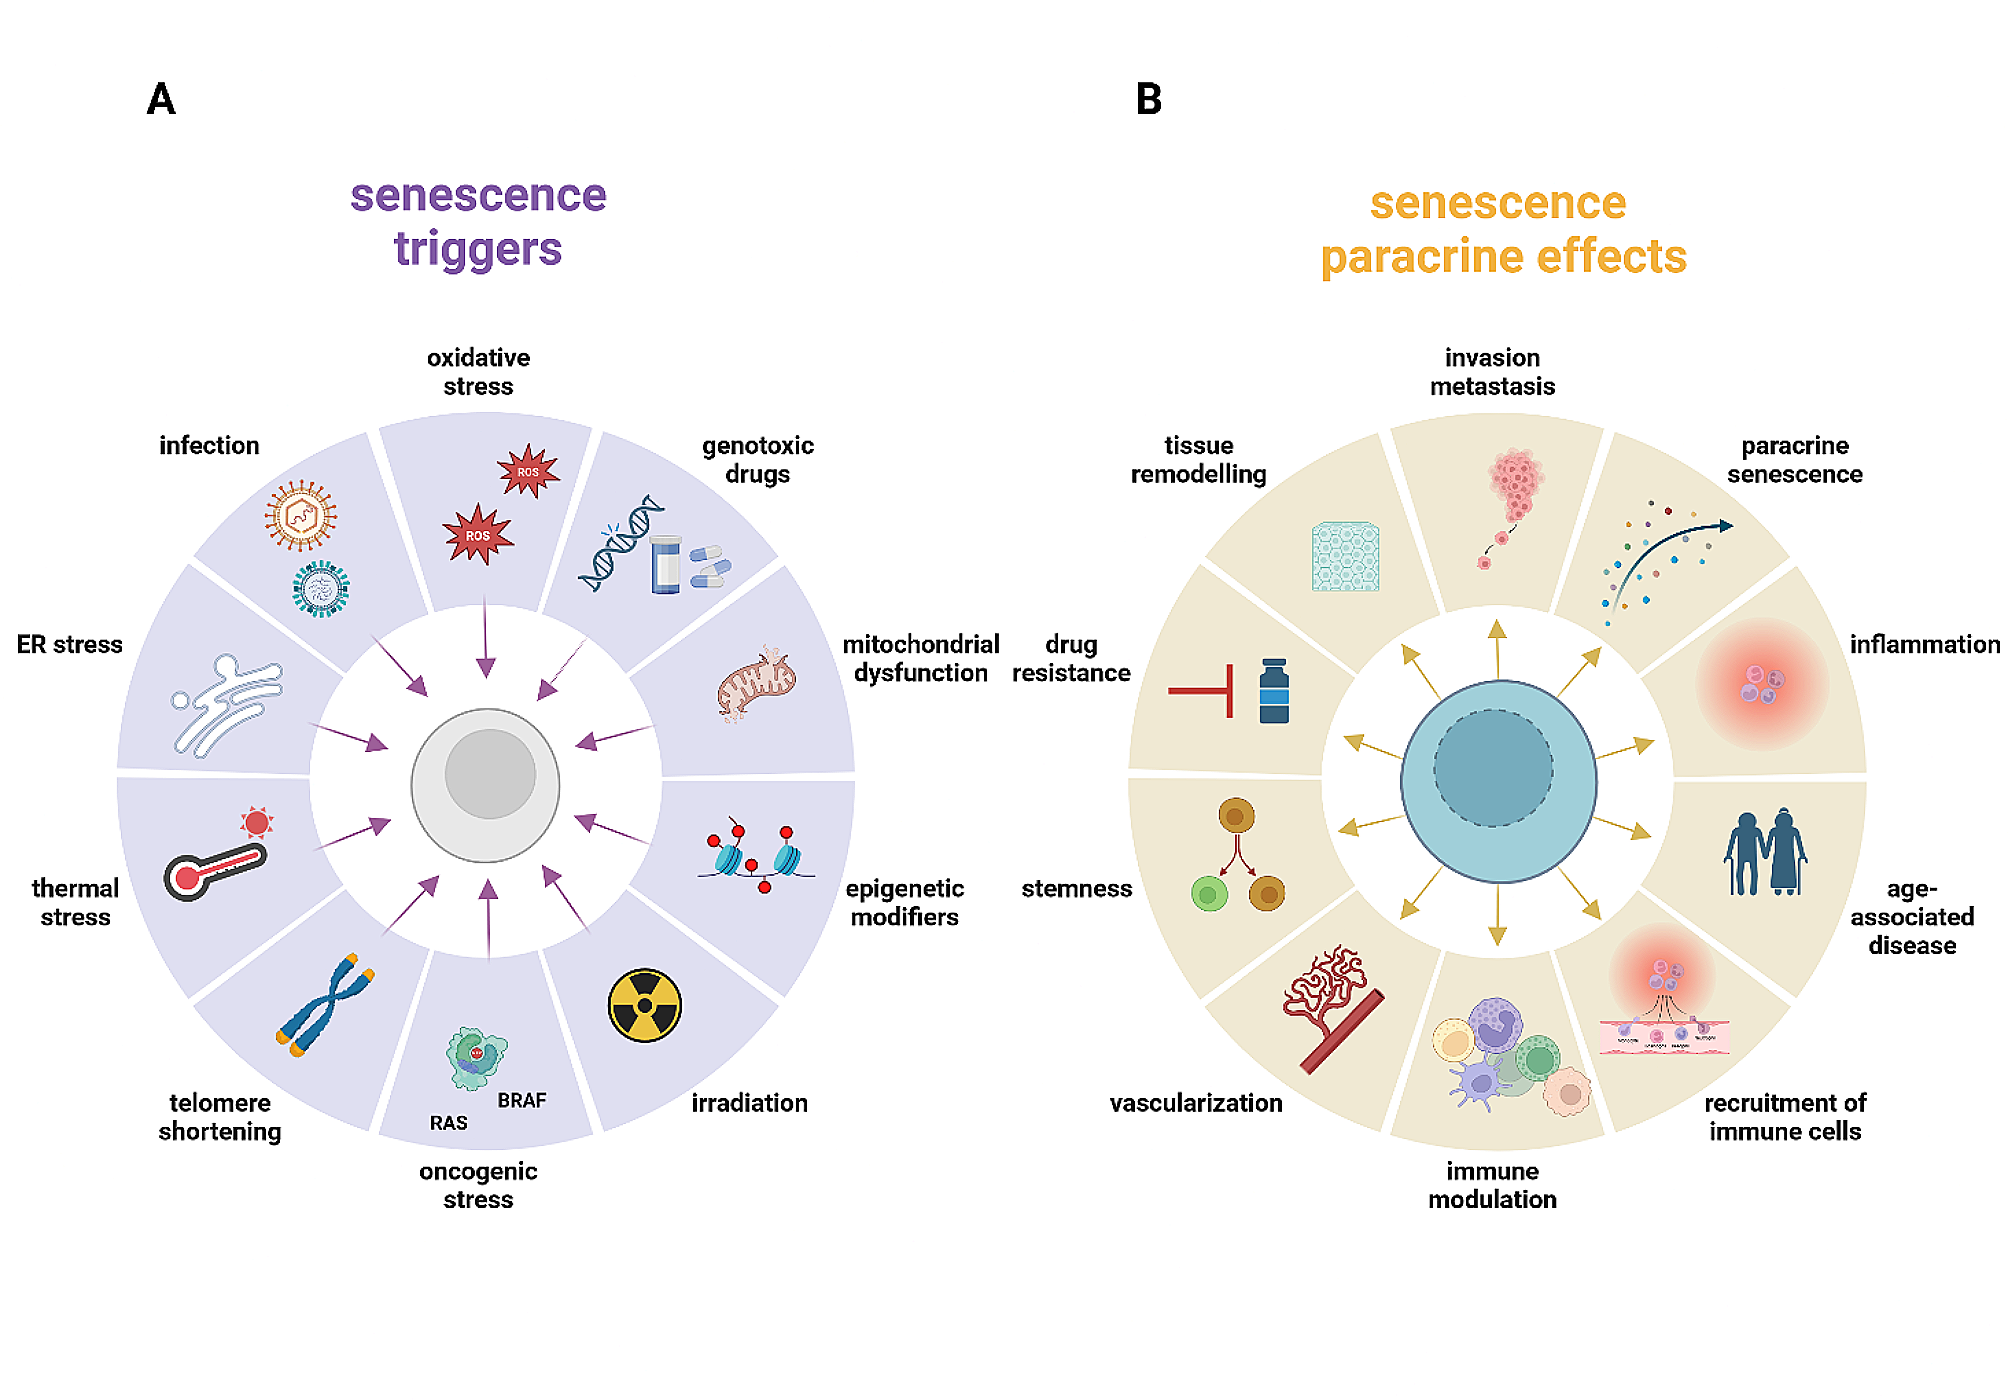 The senescence journey in cancer immunoediting